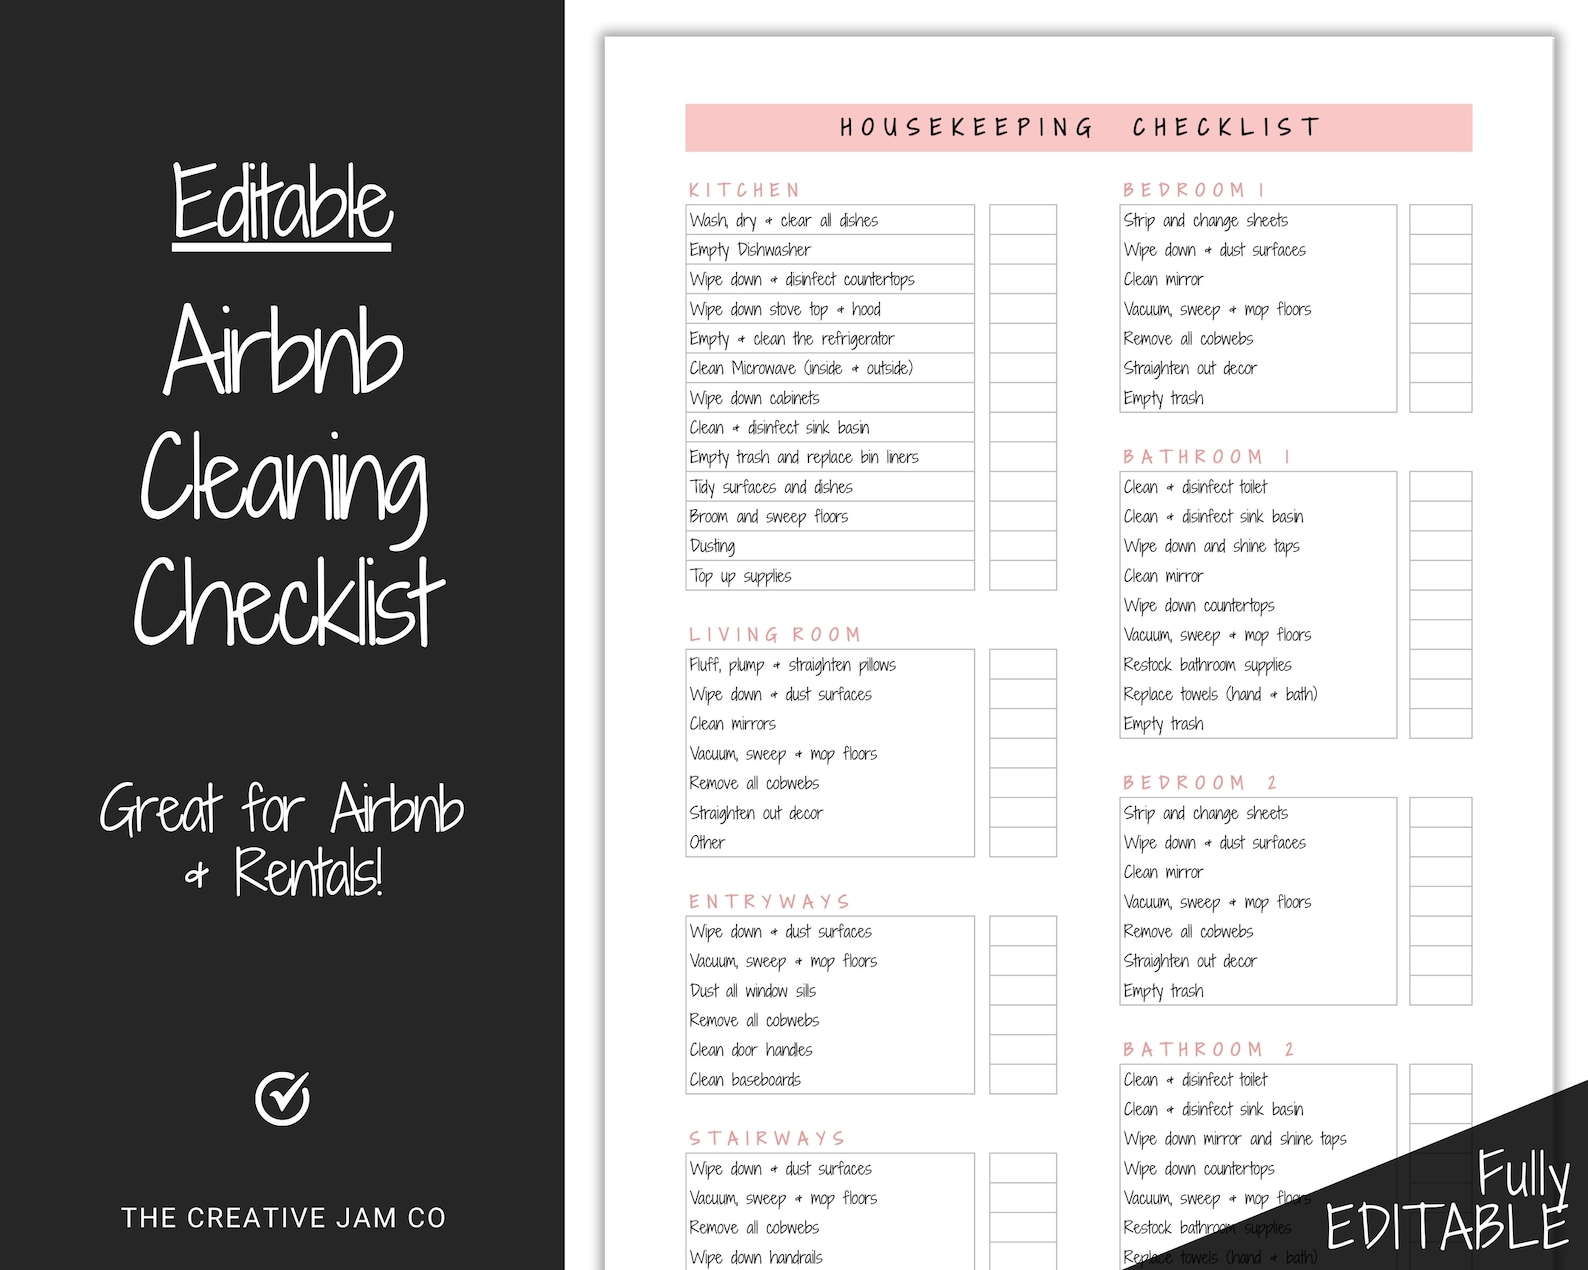 airbnb-cleaning-checklist-editable-housekeeping-cleaning-etsy